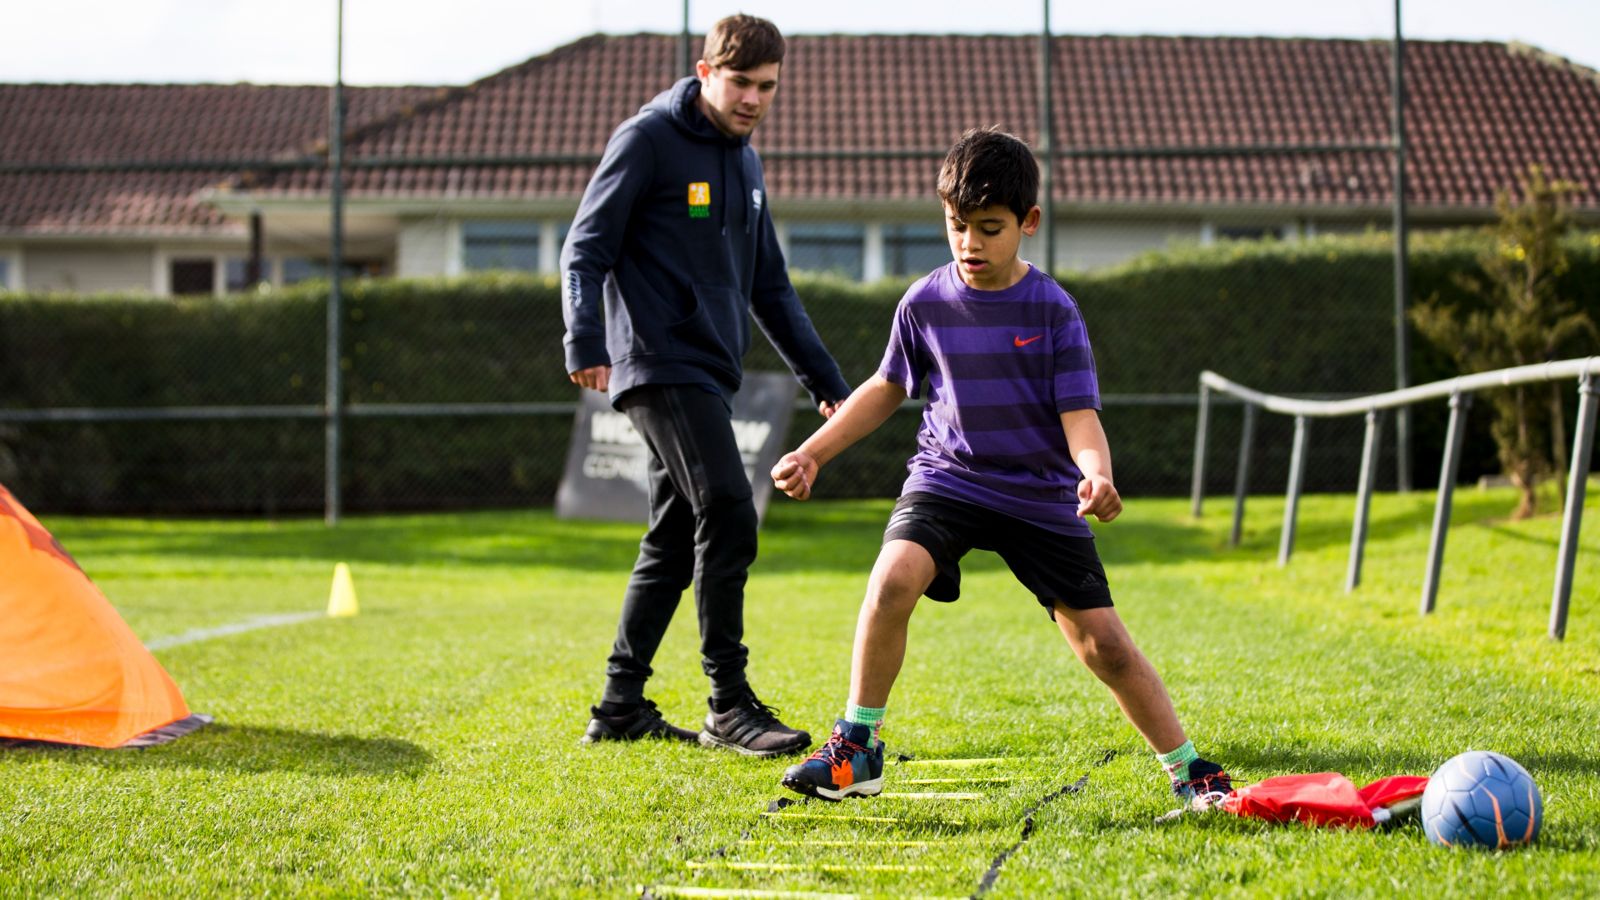 A child training on a field, with a coach behind them observing